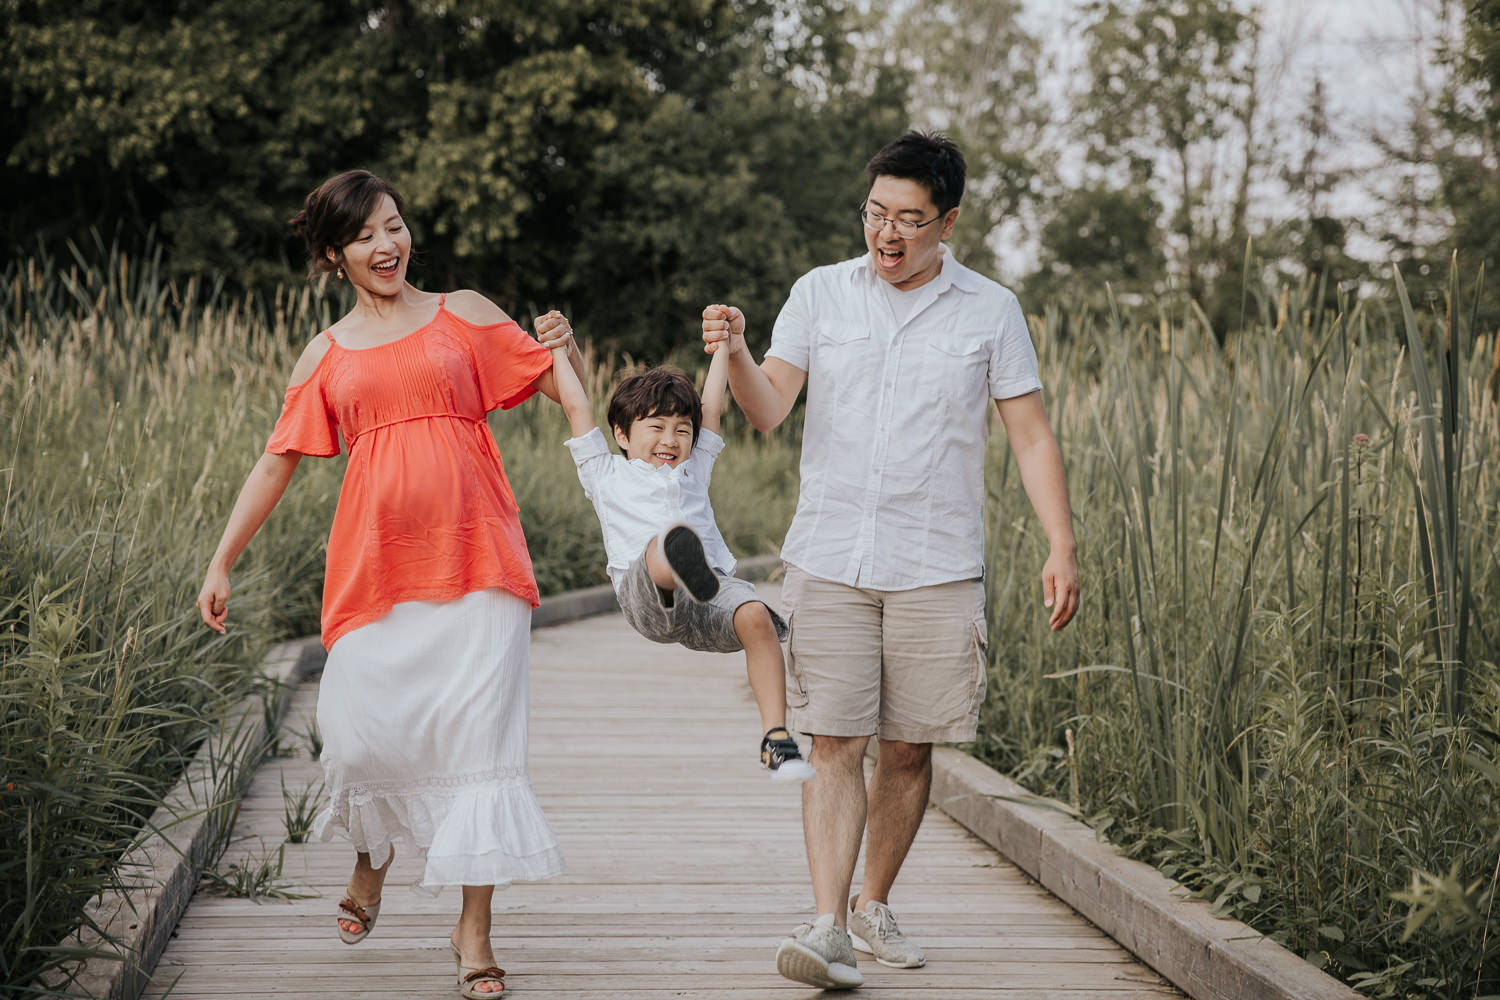 family of 3, mom and dad swing toddler boy between them as they walk down boardwalk, mom wearing flowy coral top and white skirt - Newmarket Lifestyle Photography